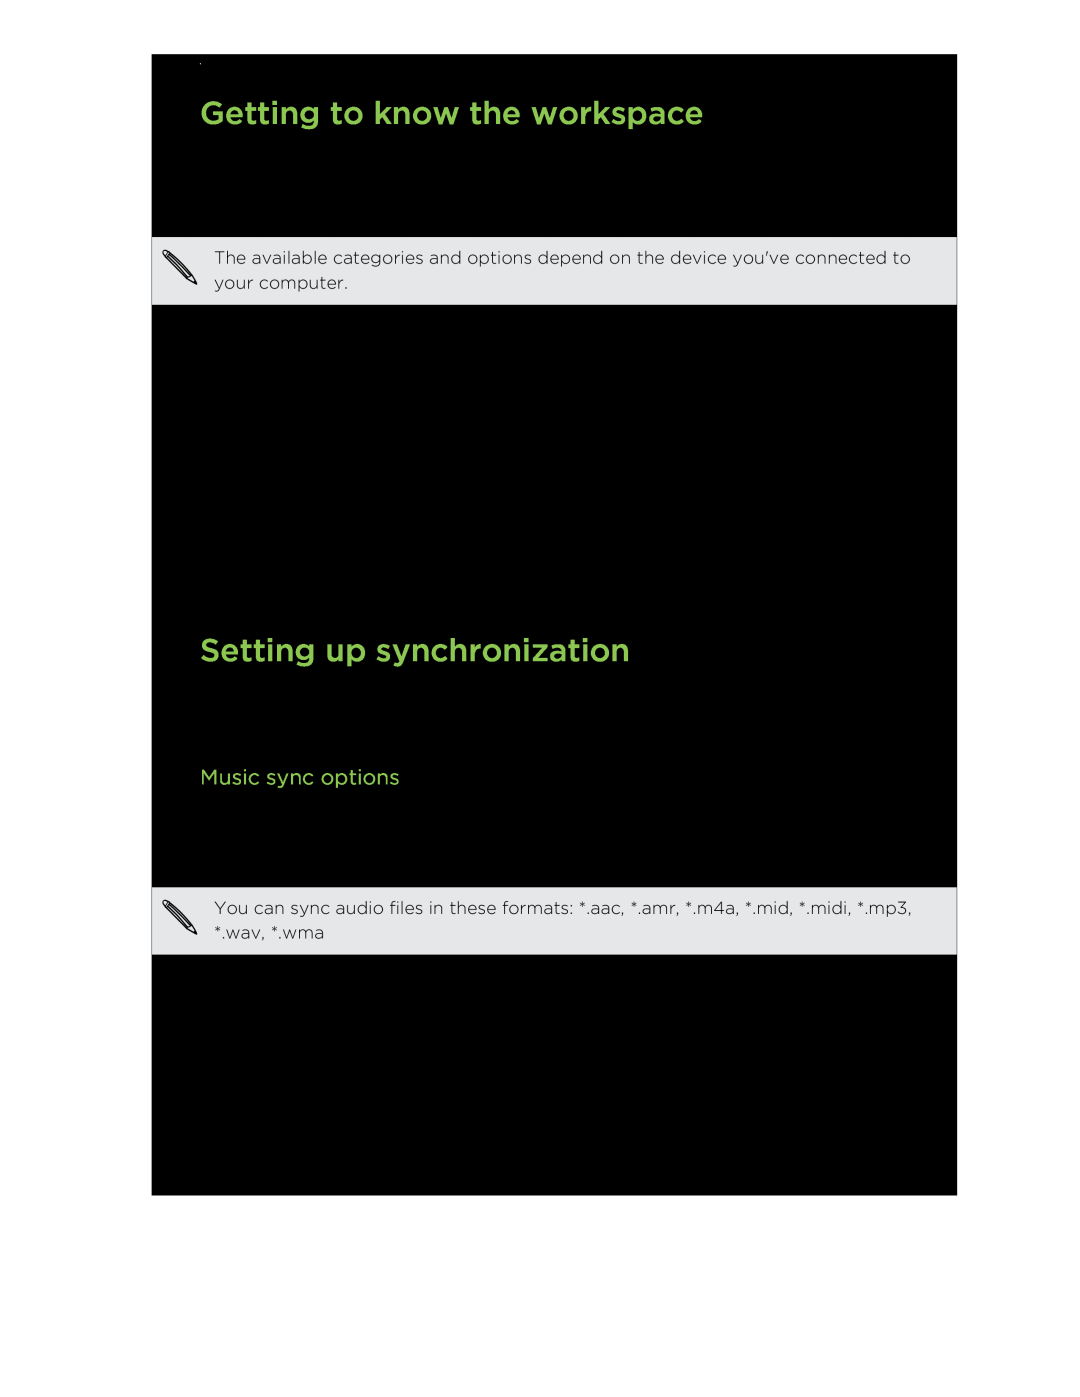 HTC manual Getting to know the workspace, Setting up synchronization, Music sync options 